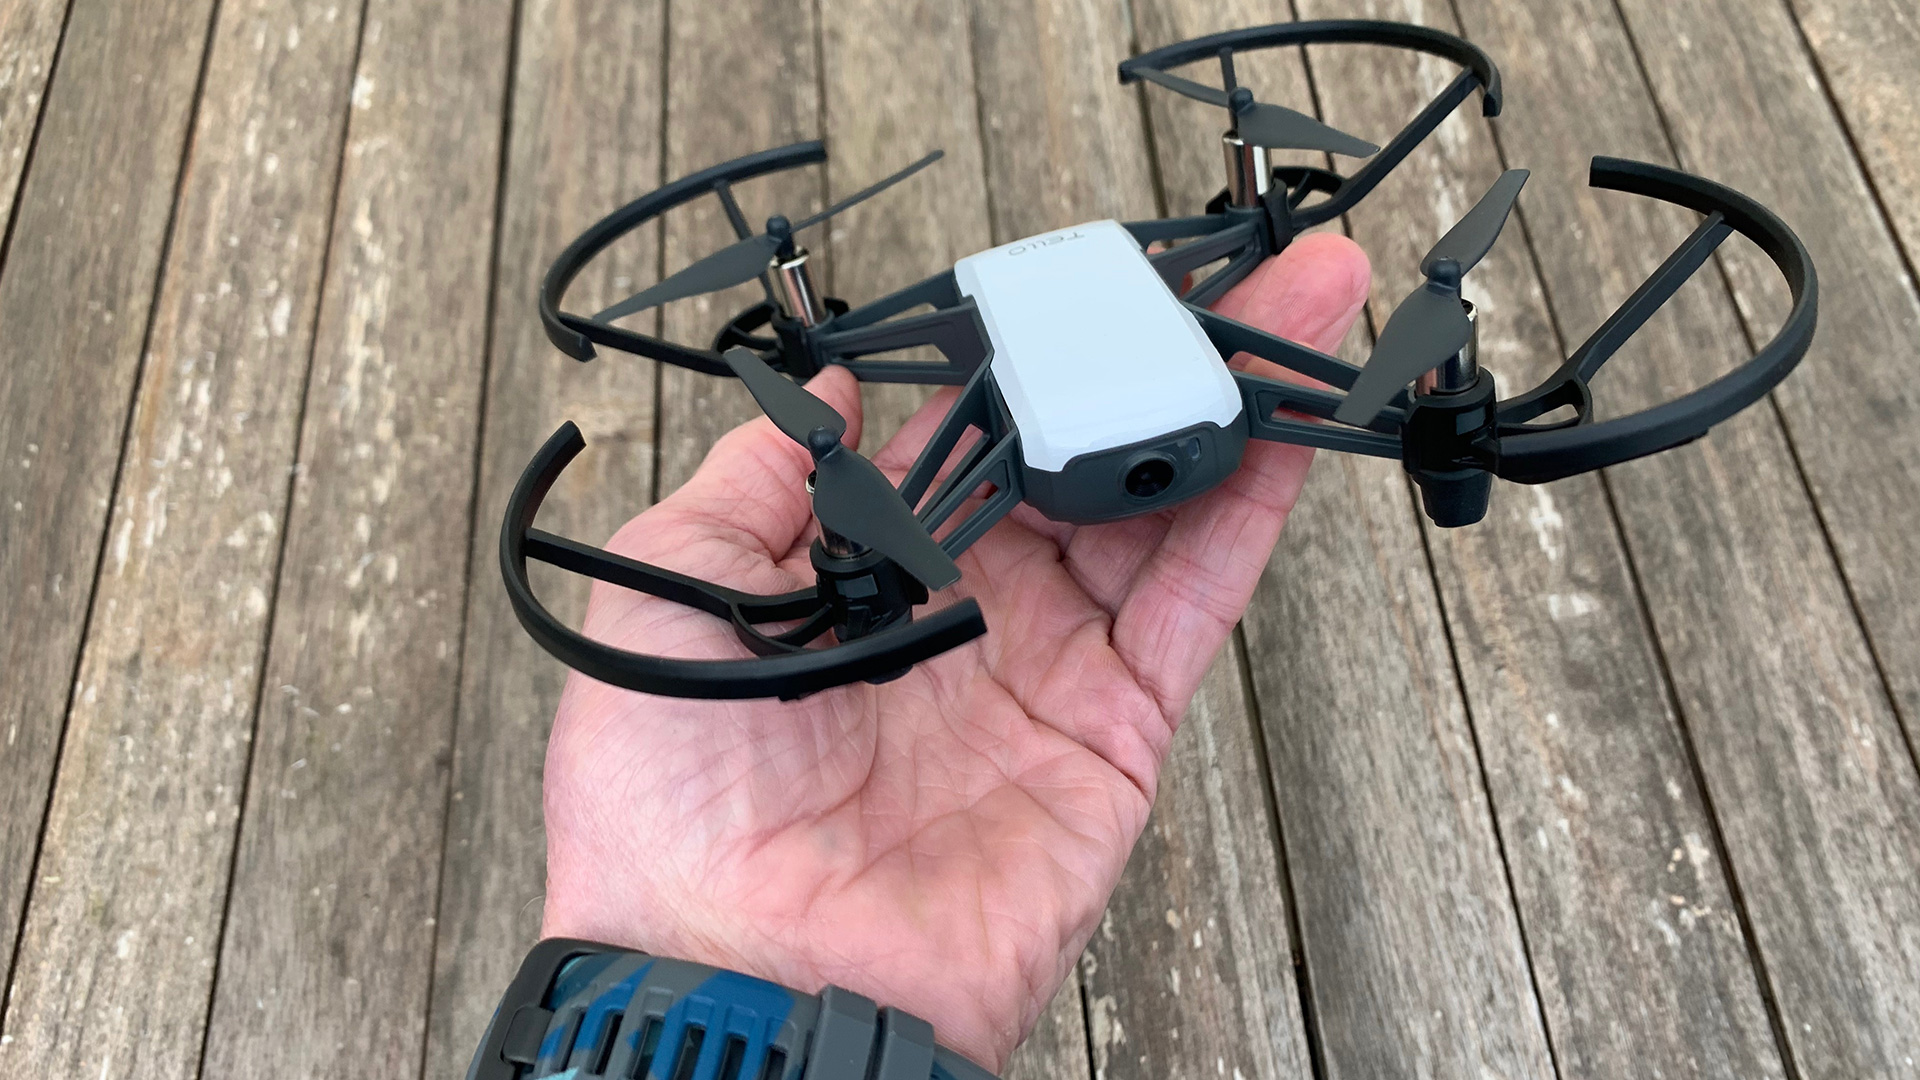 Ryze Tello Drone Review Precise Moves And Incredible Stability In A Standout Toy Drone T3